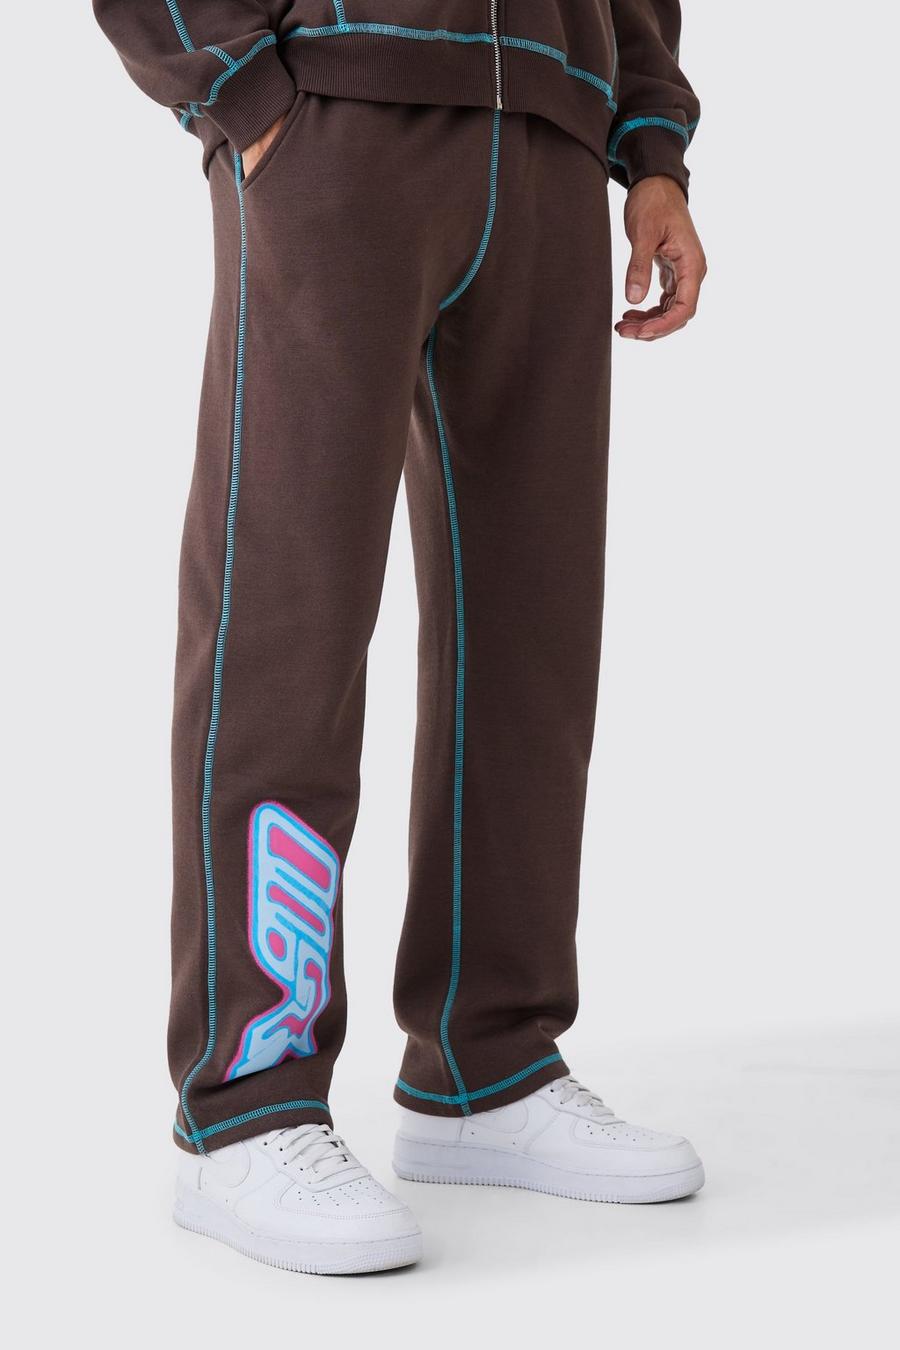 Chocolate Relaxed Contrast Stitch Leg Print Heat Graphic Sweatpants